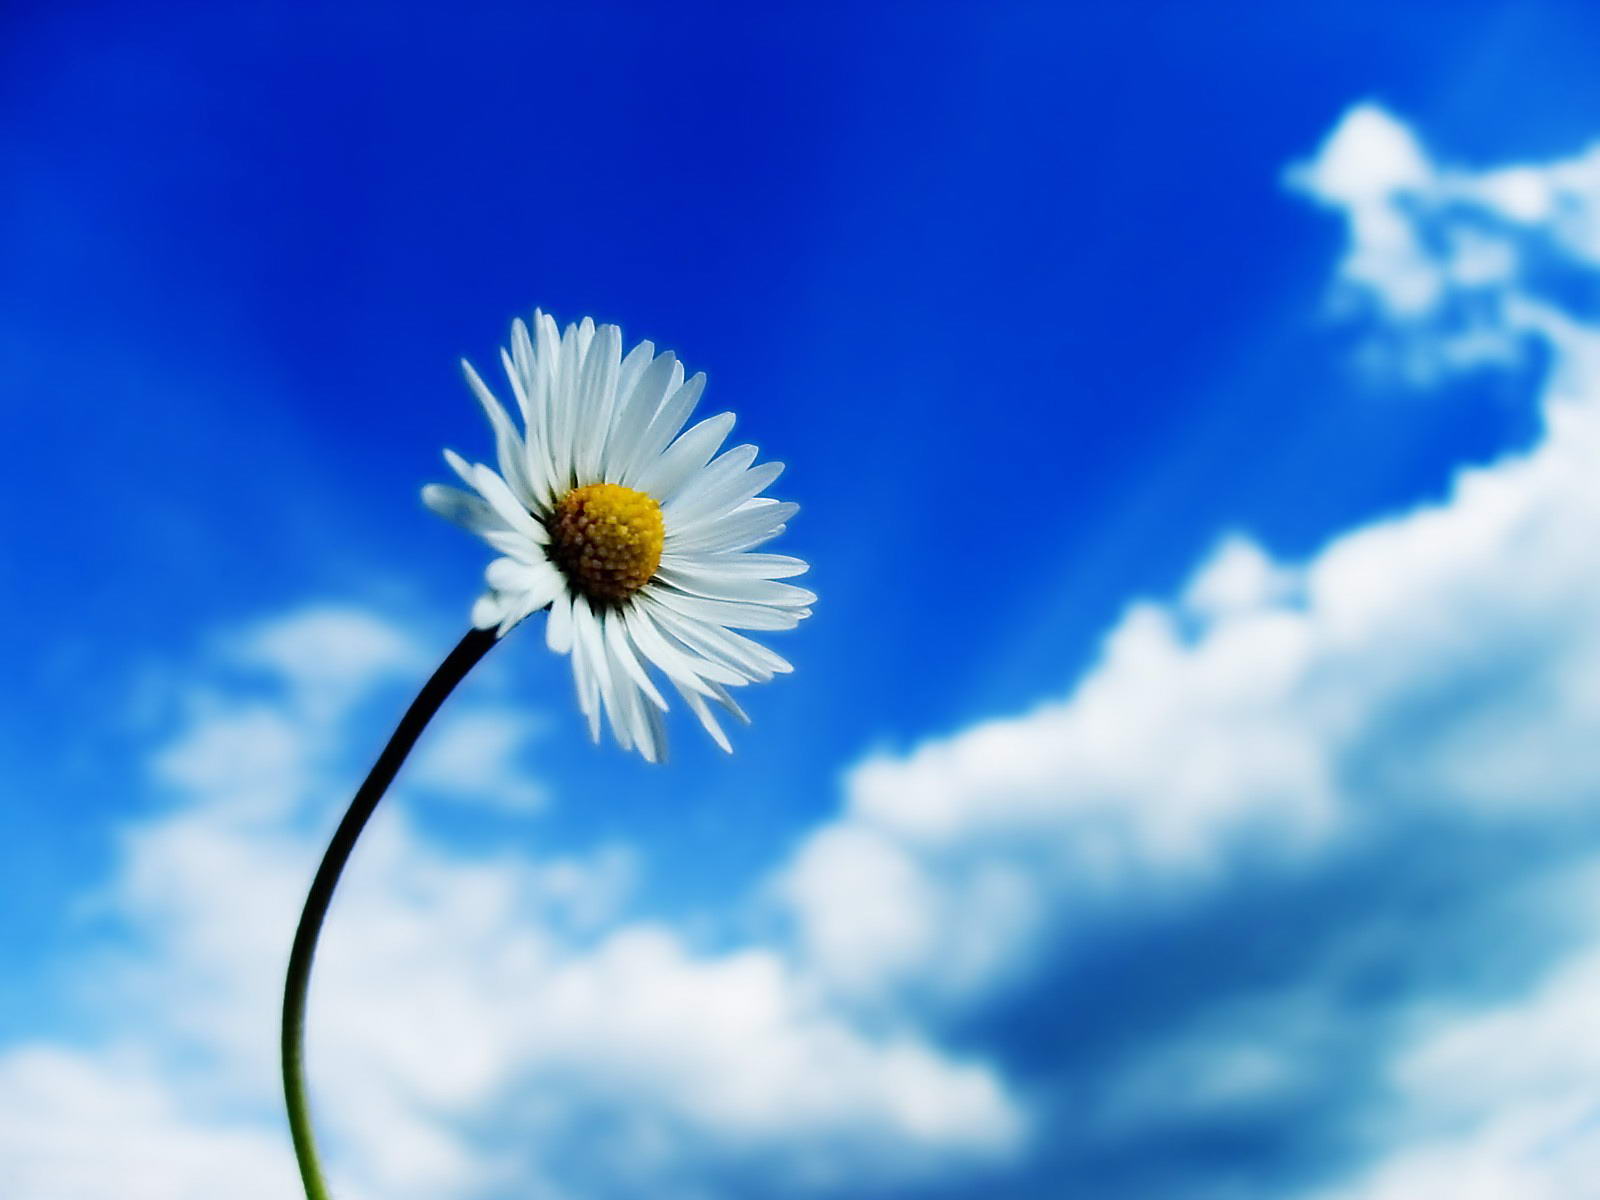 download wallpaper bagus,sky,daisy,daytime,nature,blue